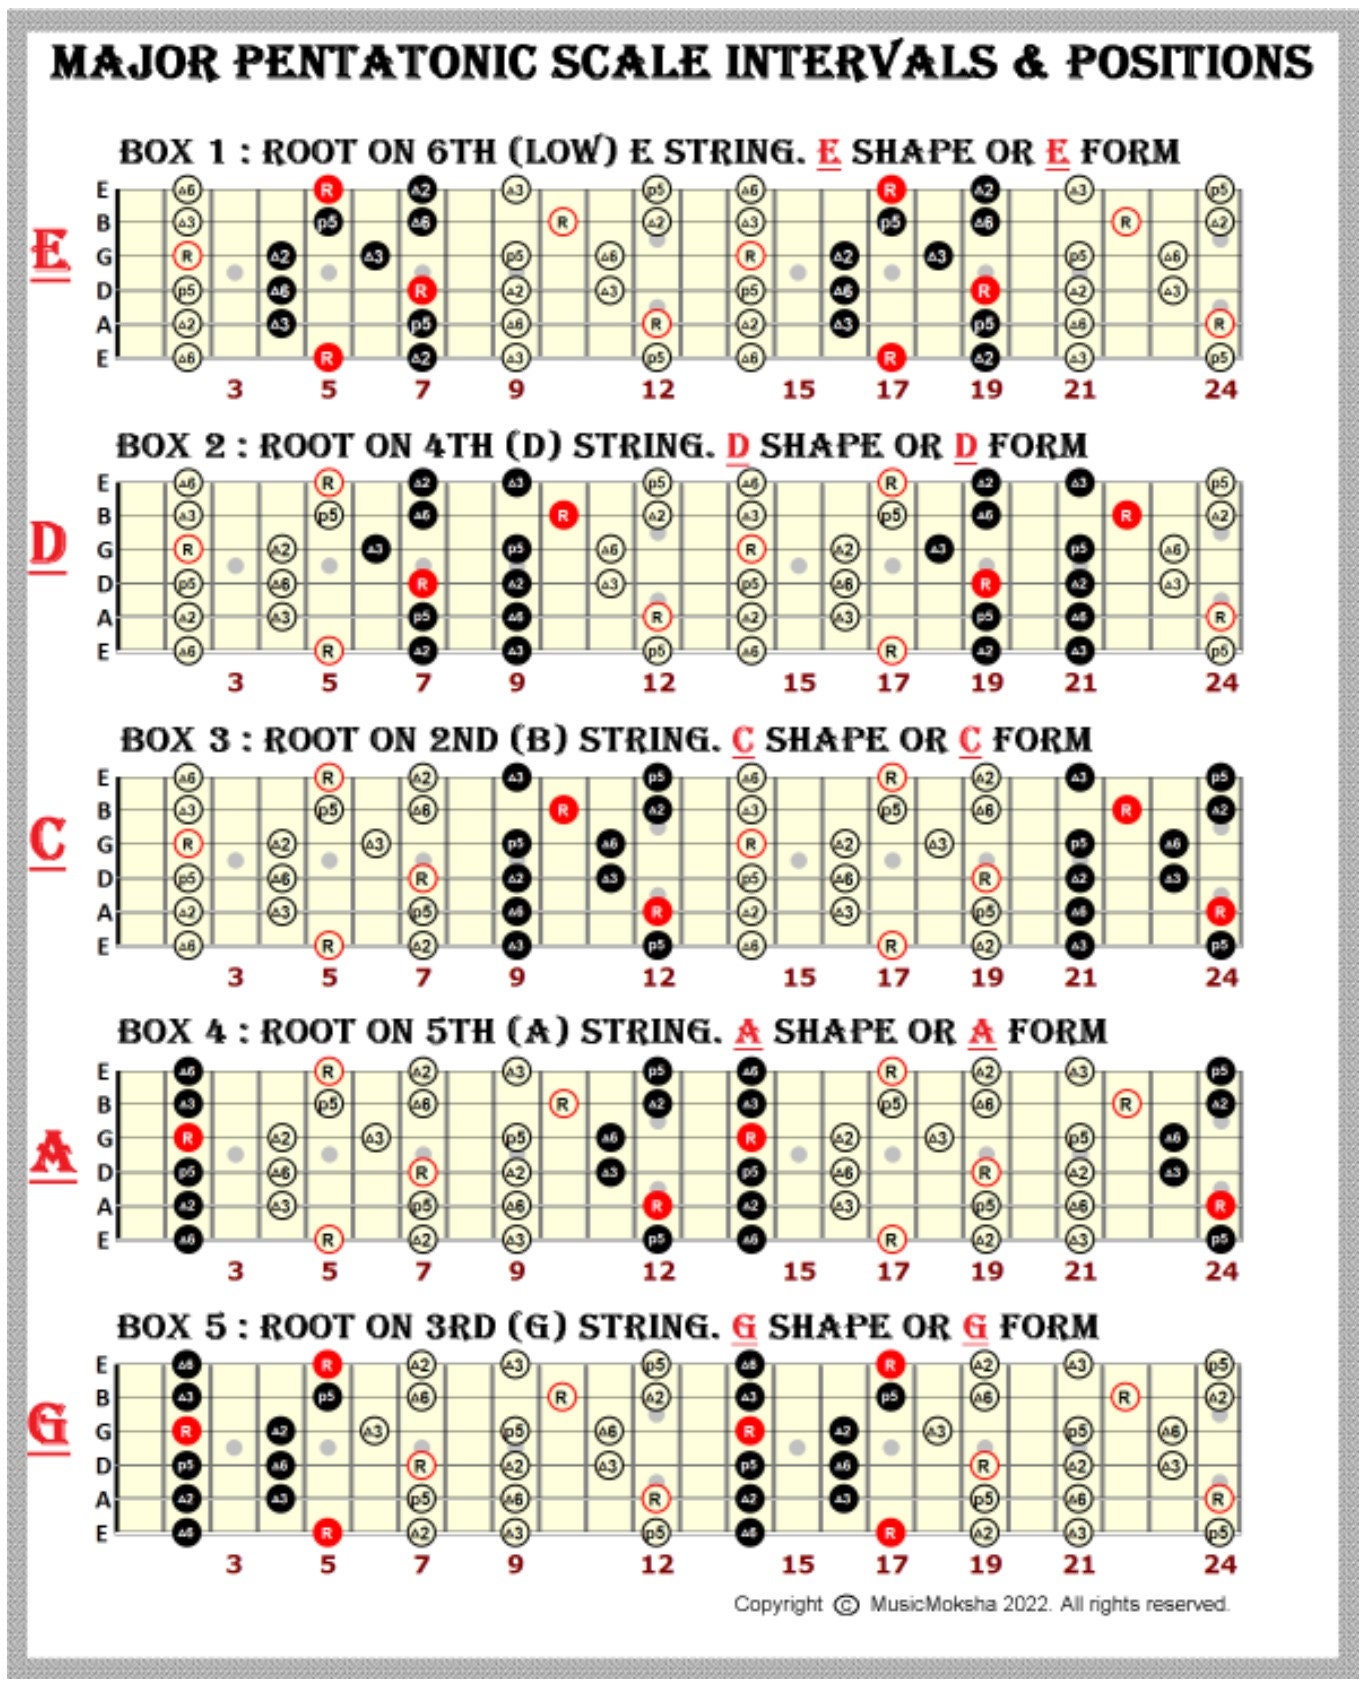 Major Pentatonic Scale Intervals and Positions Five Boxes, Shapes ...